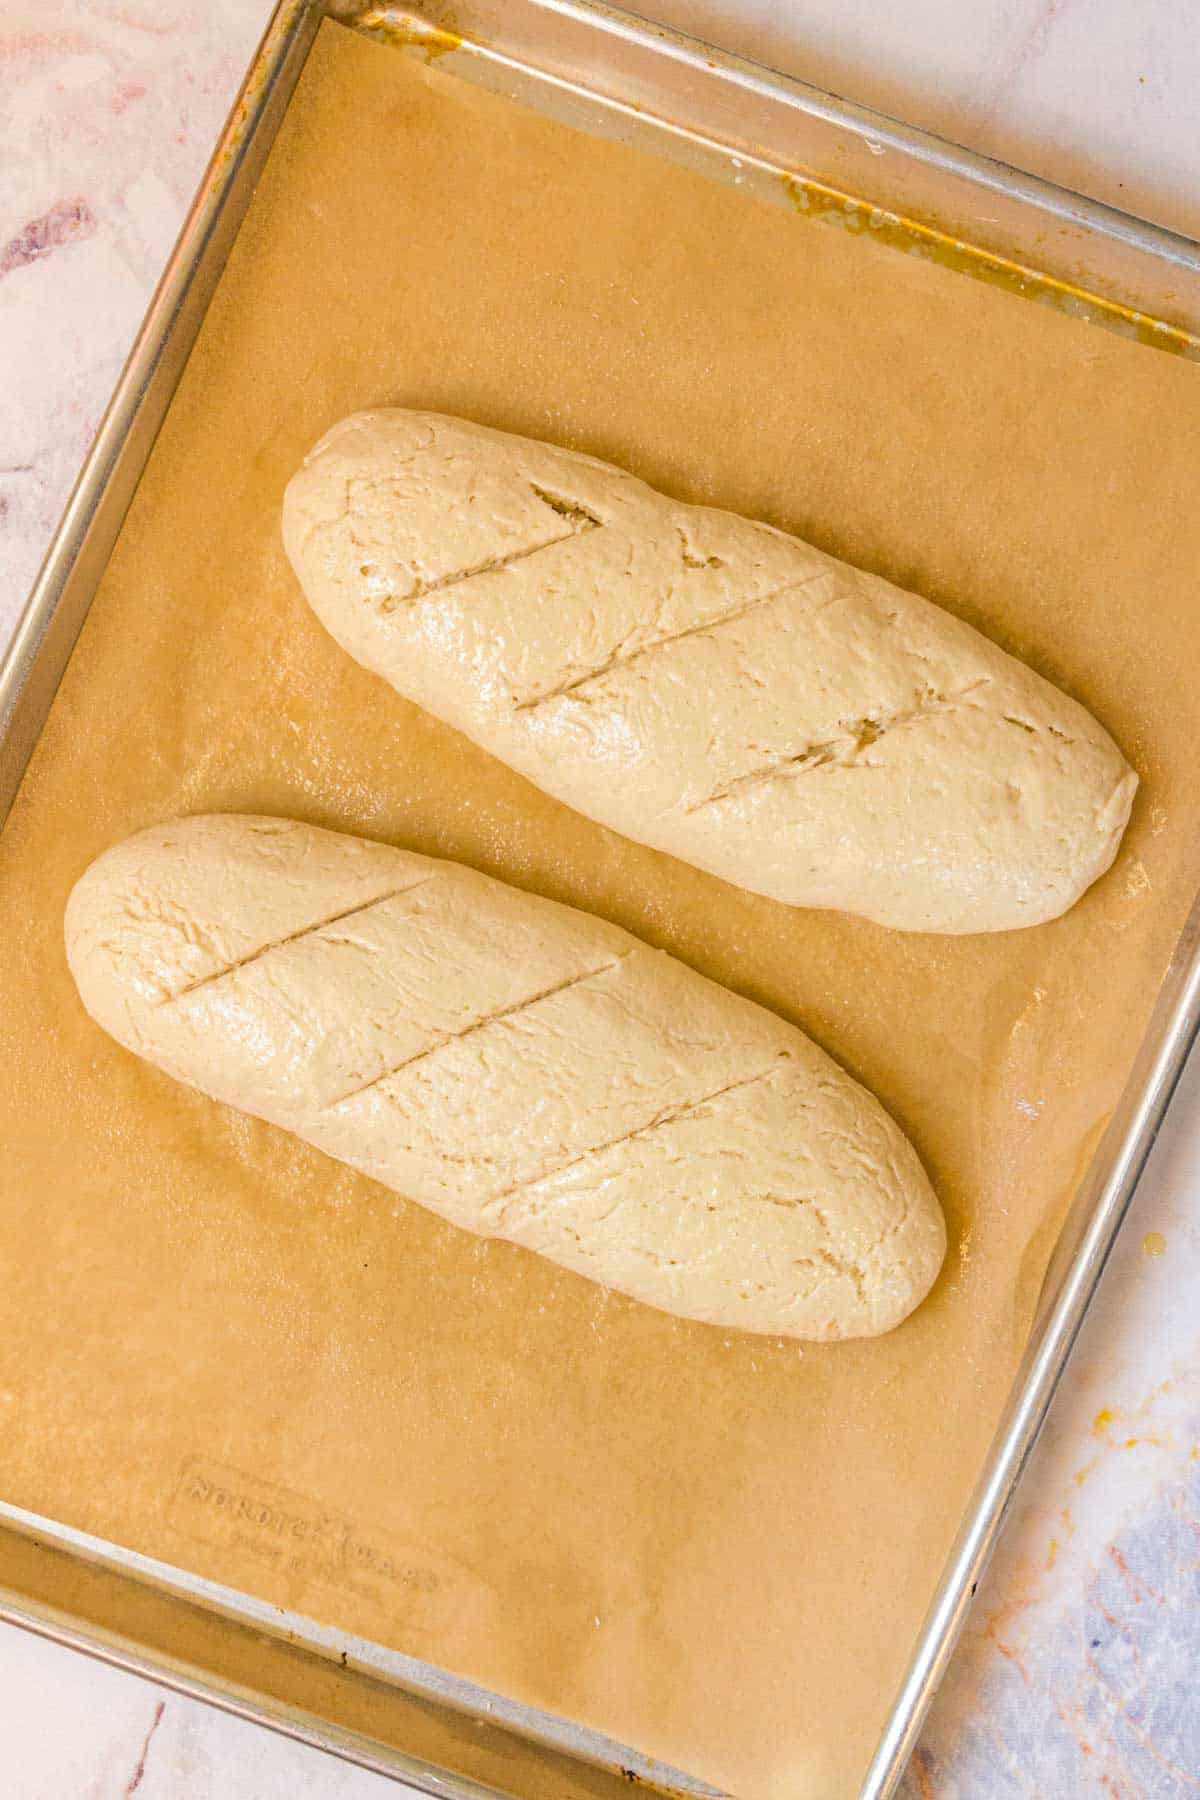 Gluten free baguettes on a baking sheet ready to be baked.